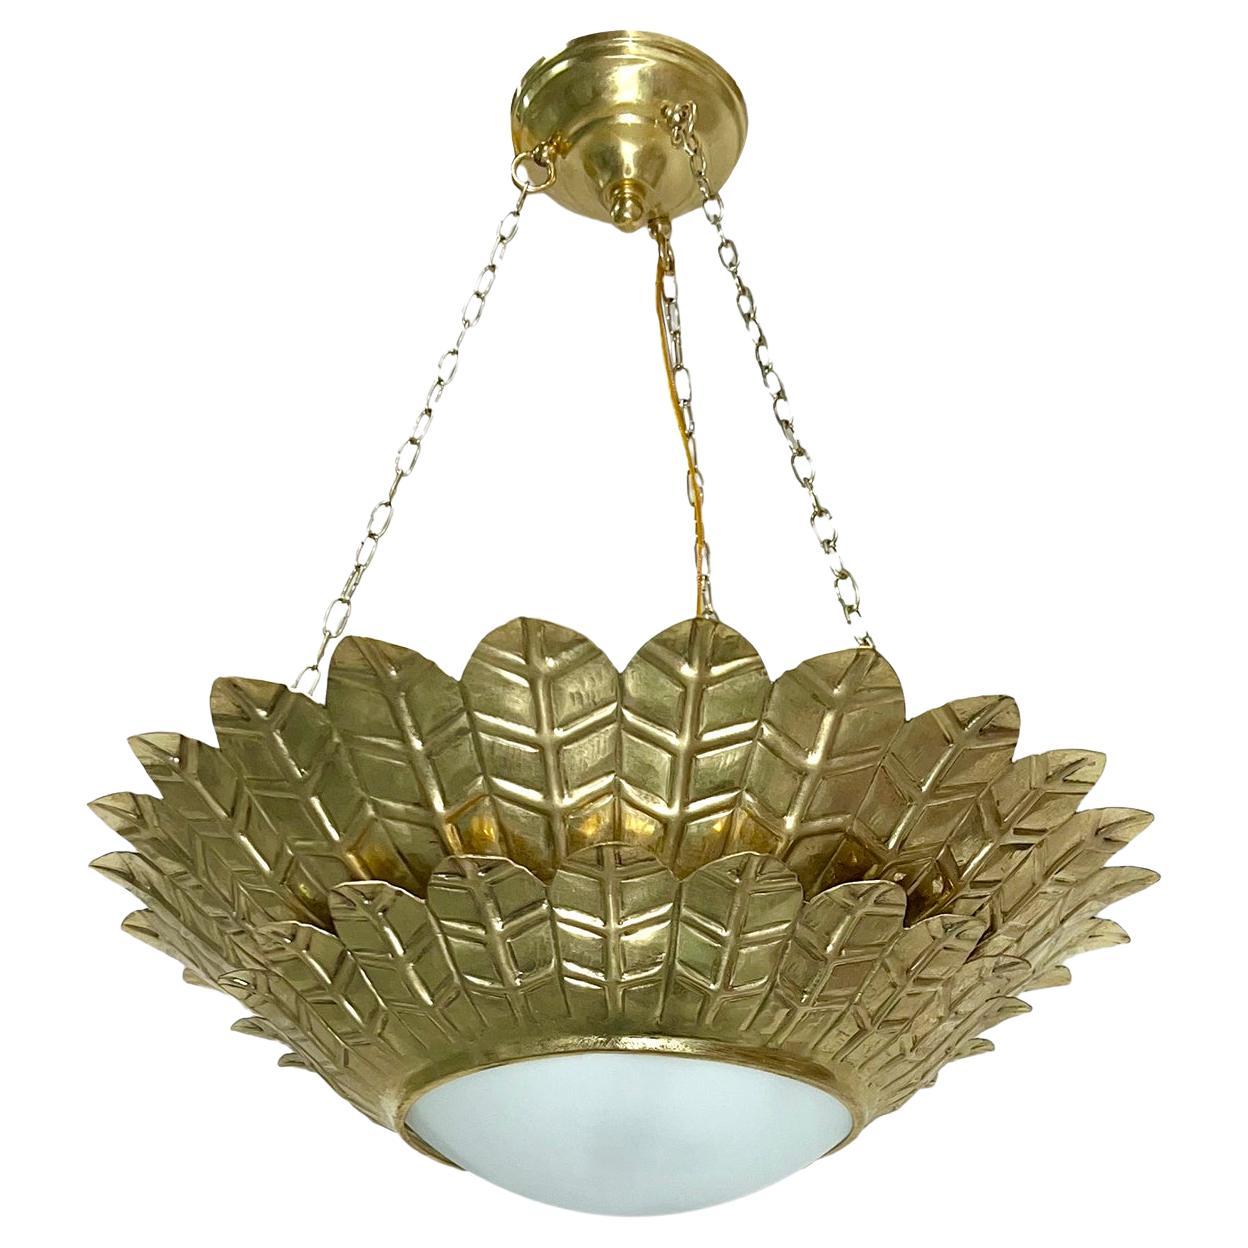 Set of Gilt Sunburst Double-Tiered Light Fixtures. Sold Individually